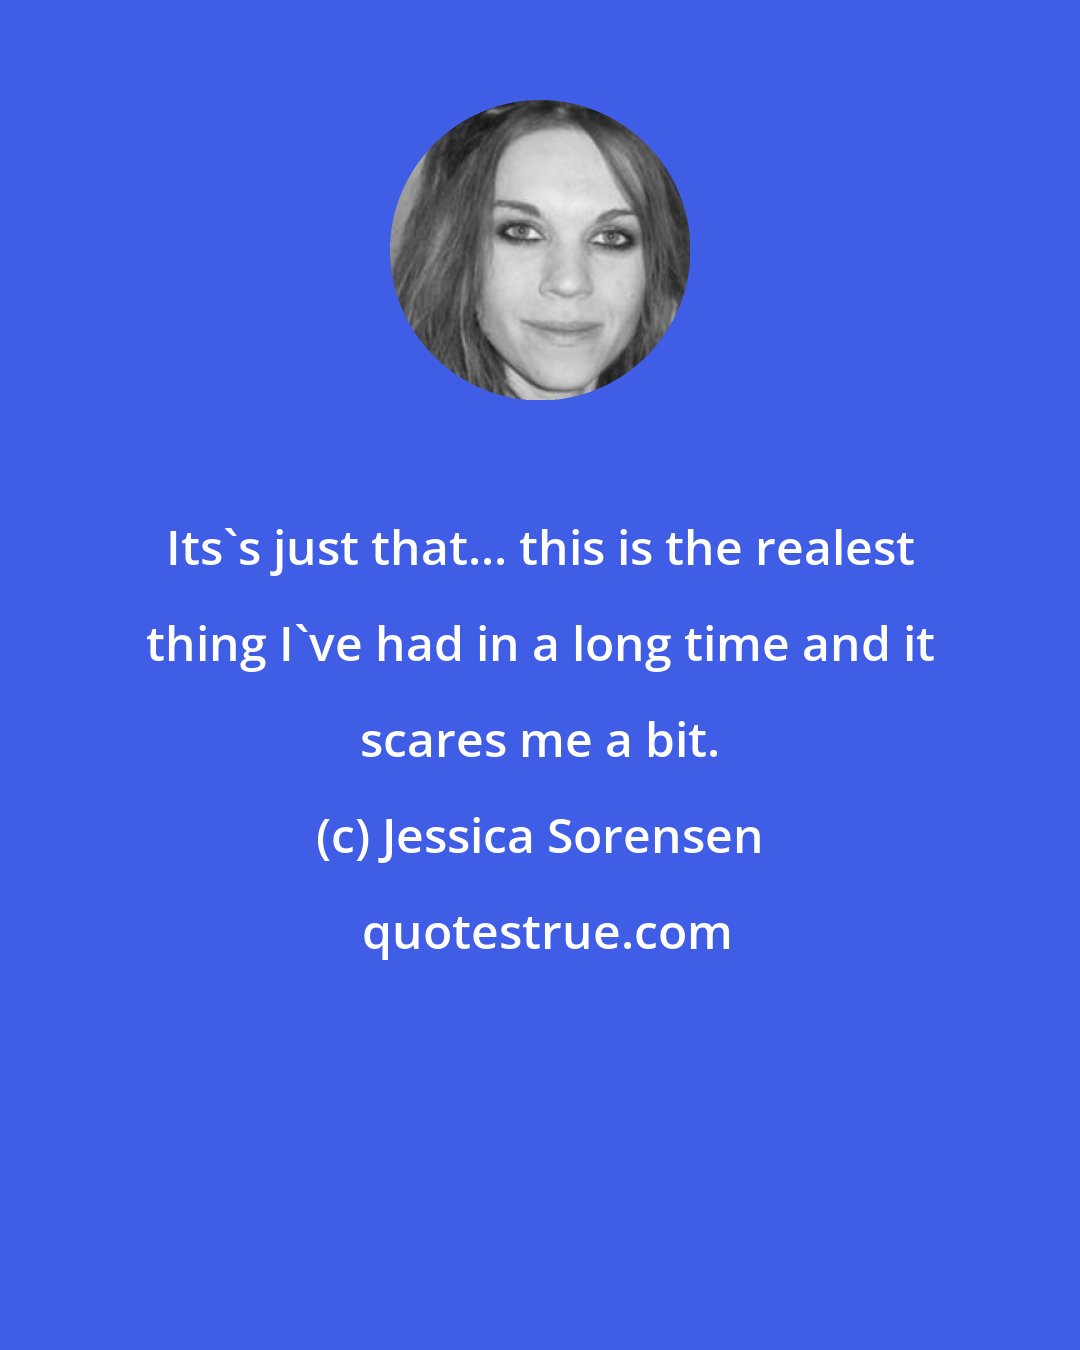 Jessica Sorensen: Its's just that... this is the realest thing I've had in a long time and it scares me a bit.